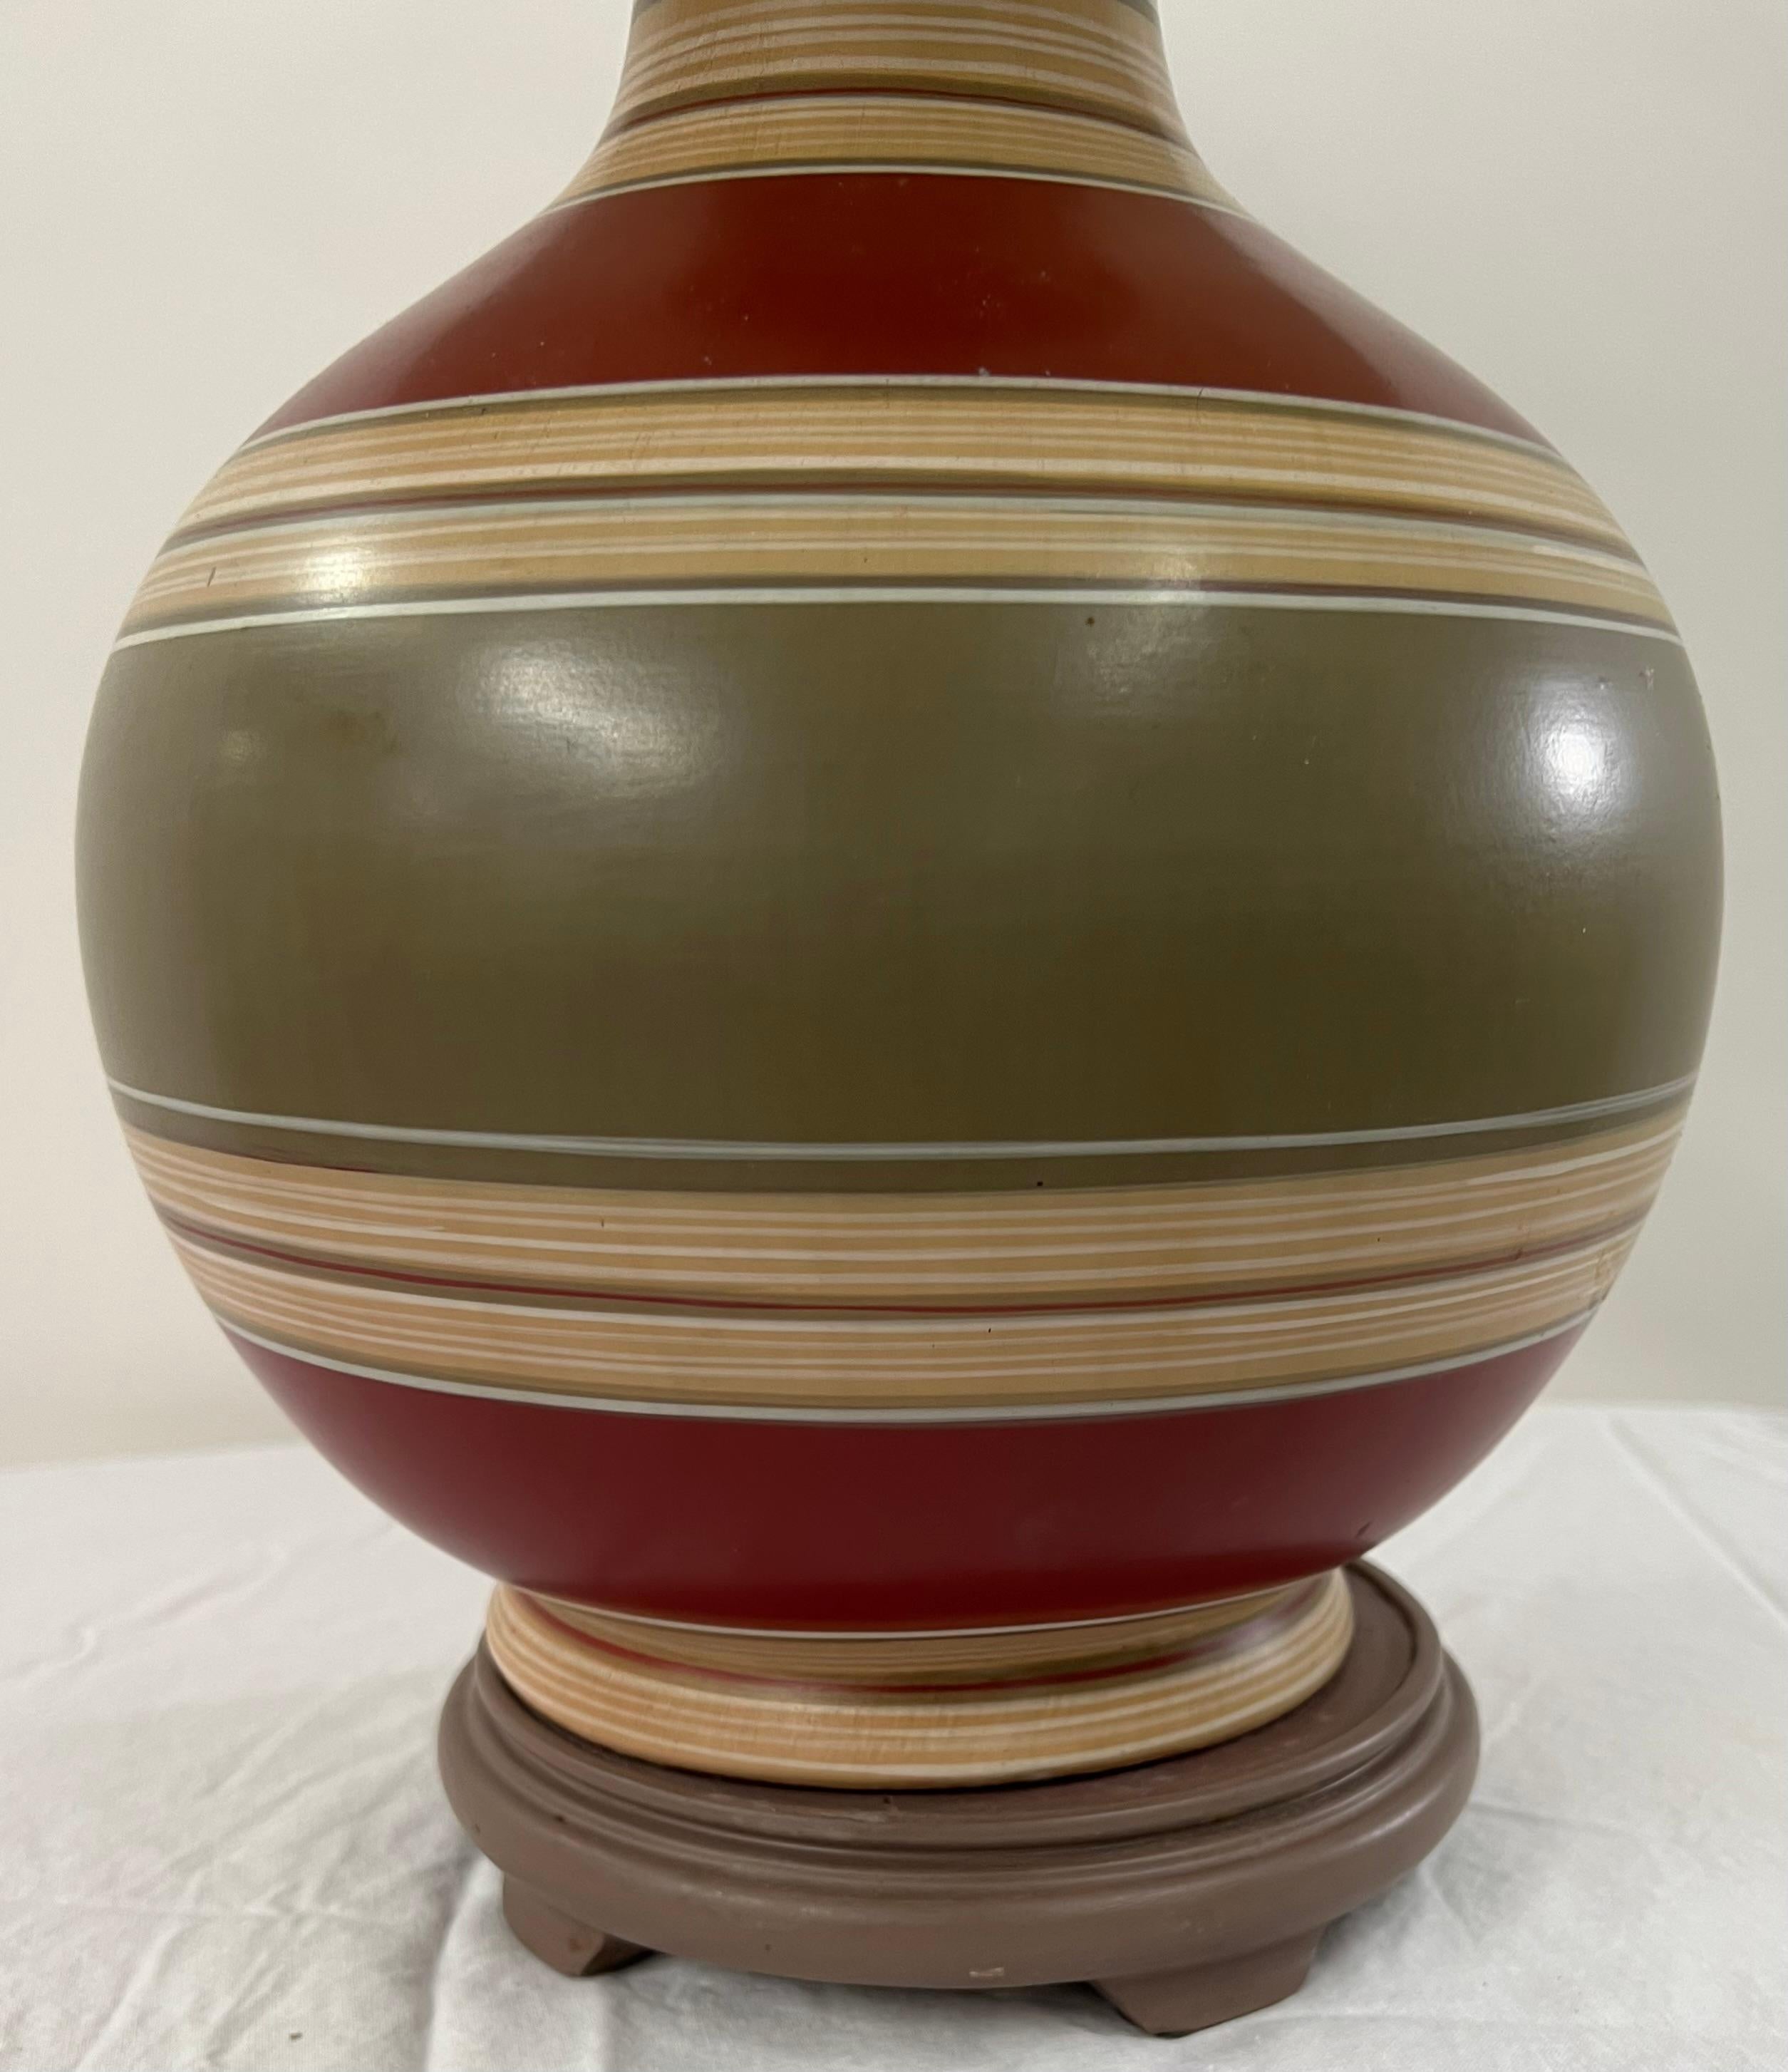 A Mid-Century ceramic table lamp. The lamp body is finely handprinted in beautifully earthy tone colors or green, beige and burgundy and comes with its original shade. There is a small chip on the ceramic as seen on the 4th Photo of the listing. The